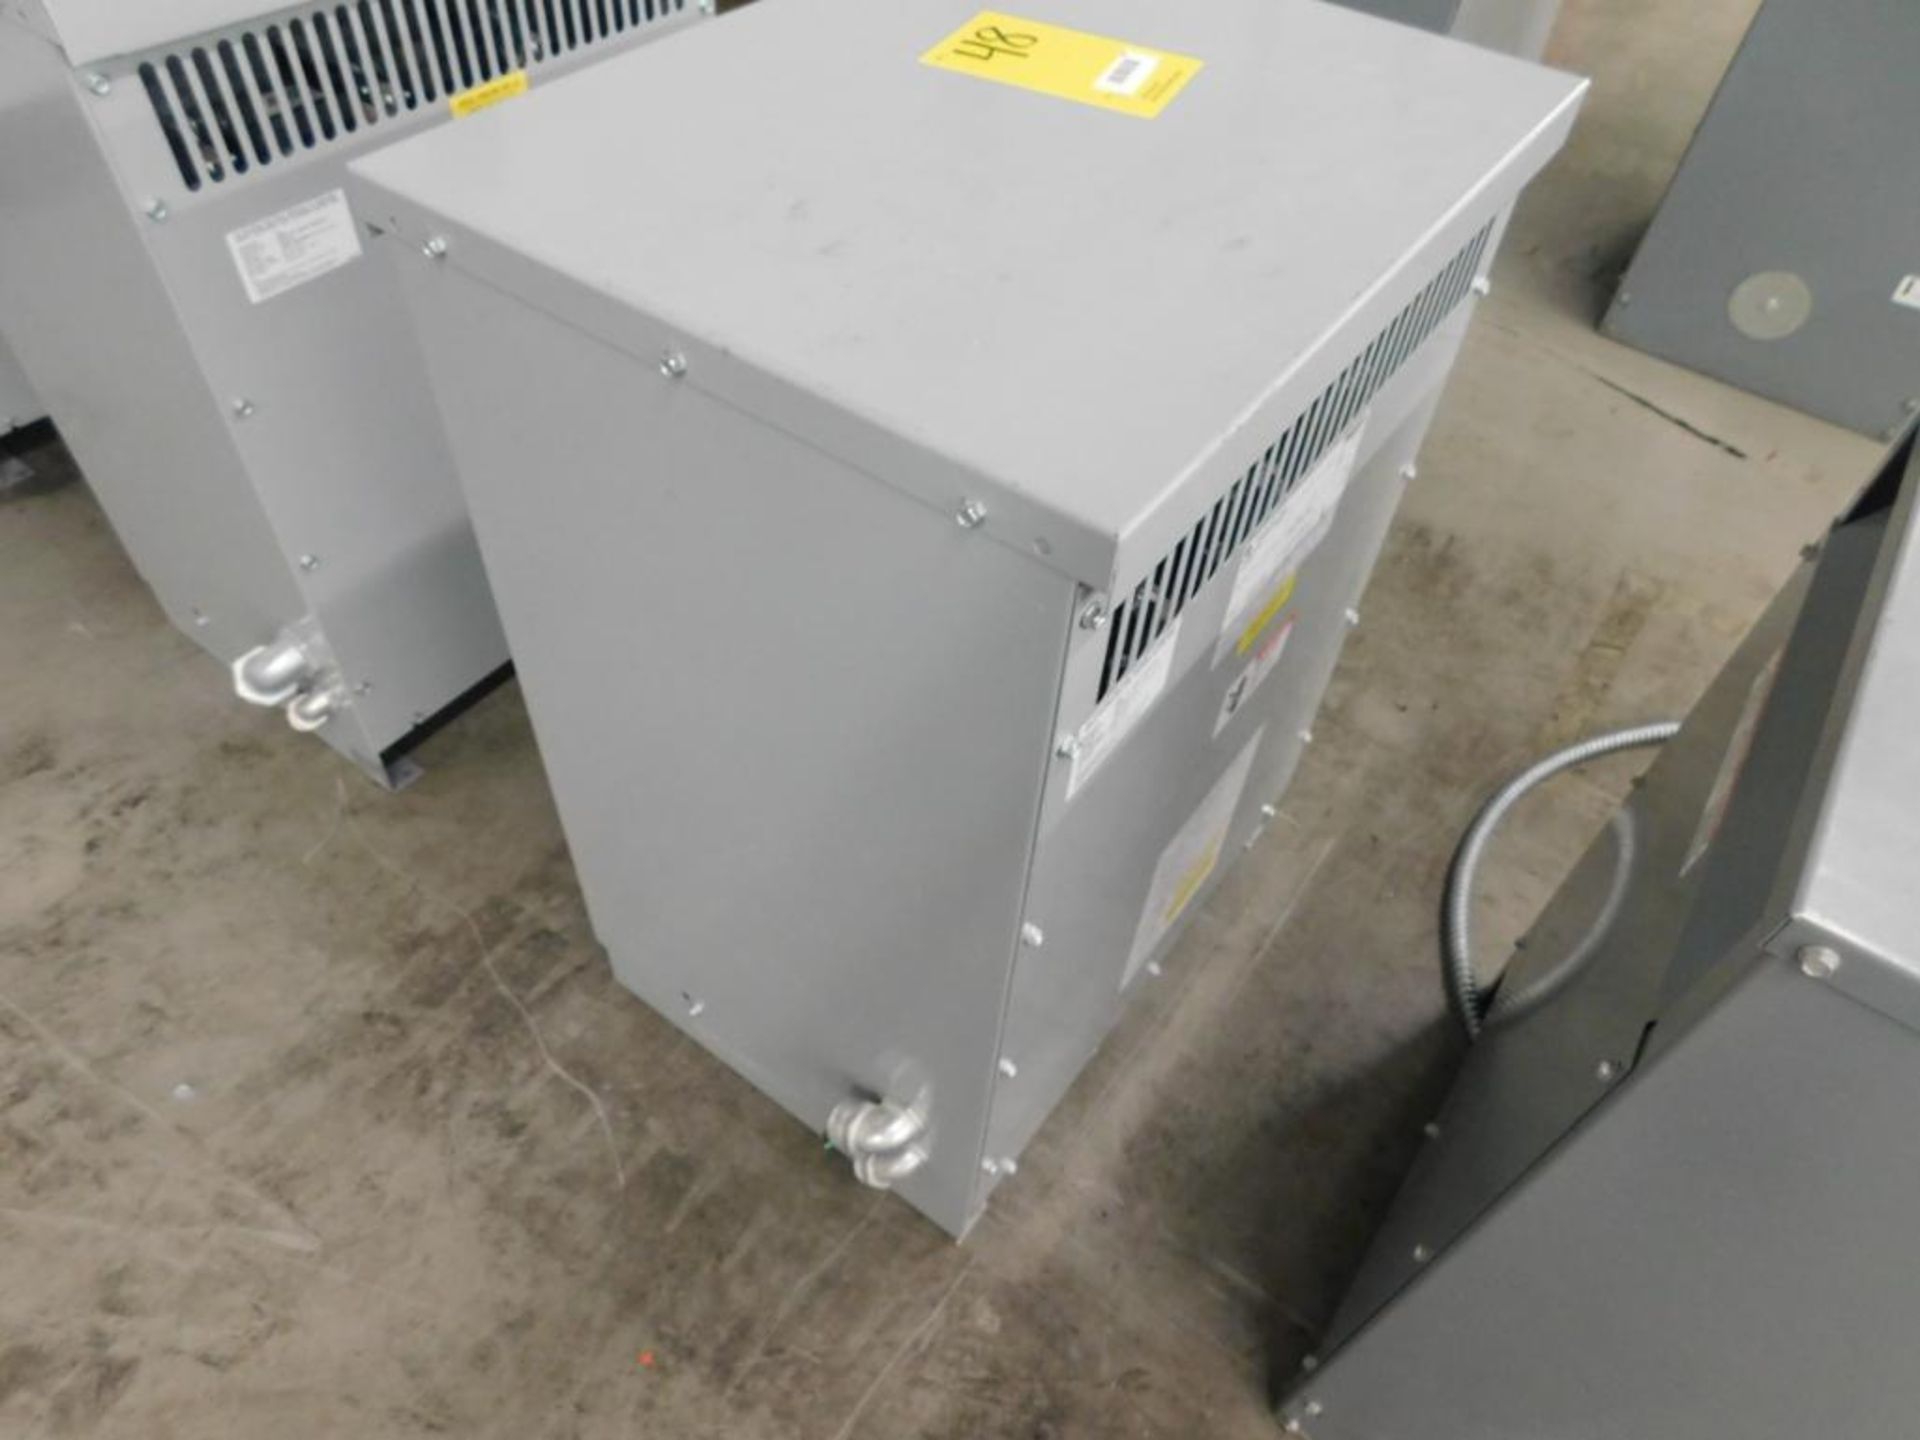 GE TRANSFORMER, 45.0 KVA, 3-PH, 480 PRIMARY VOLTS, 208/120 SECONDARY, CAT# 9T83B3873 - Image 2 of 2